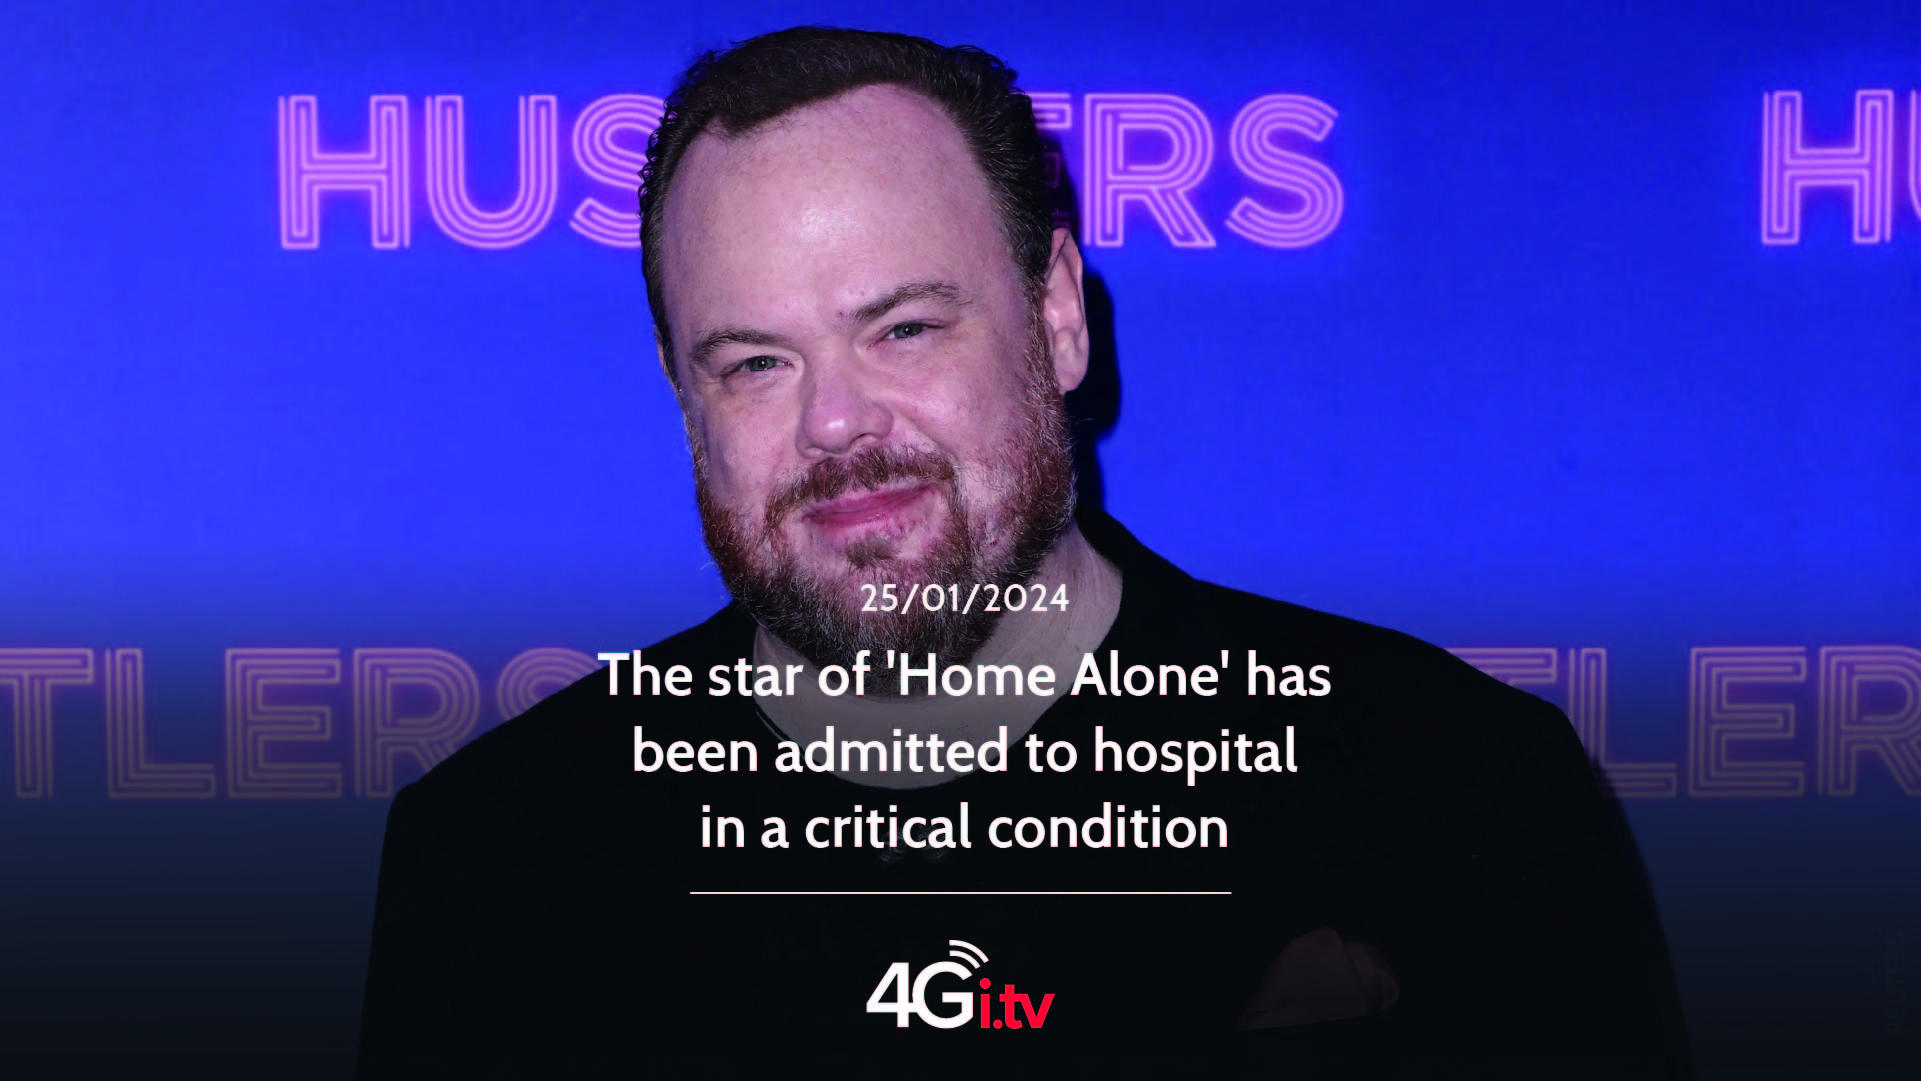 Подробнее о статье The star of ‘Home Alone’ has been admitted to hospital in a critical condition